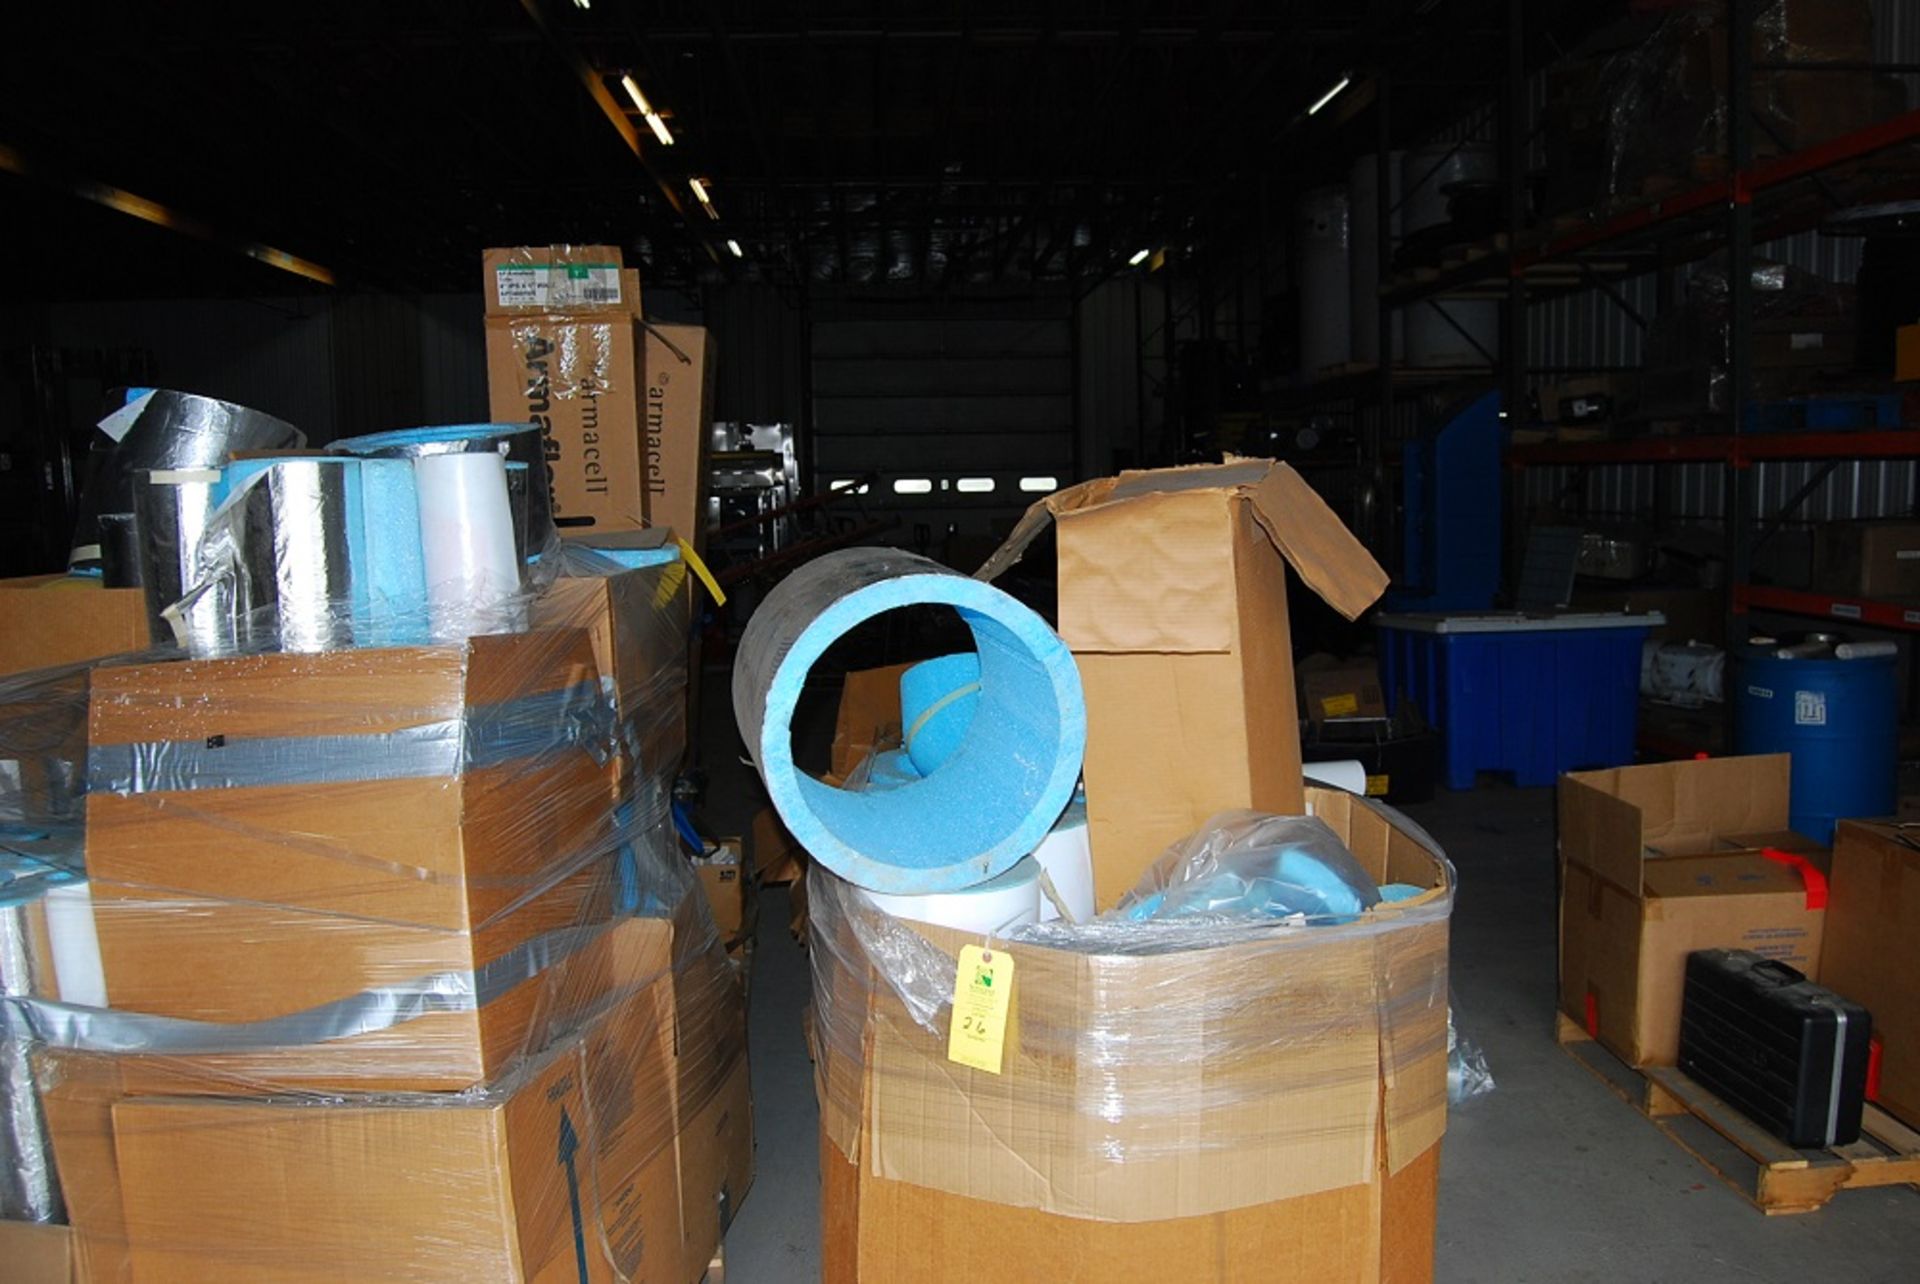 Pallets Of Miscellaneous Size Of Pipe Insallation - Image 6 of 9